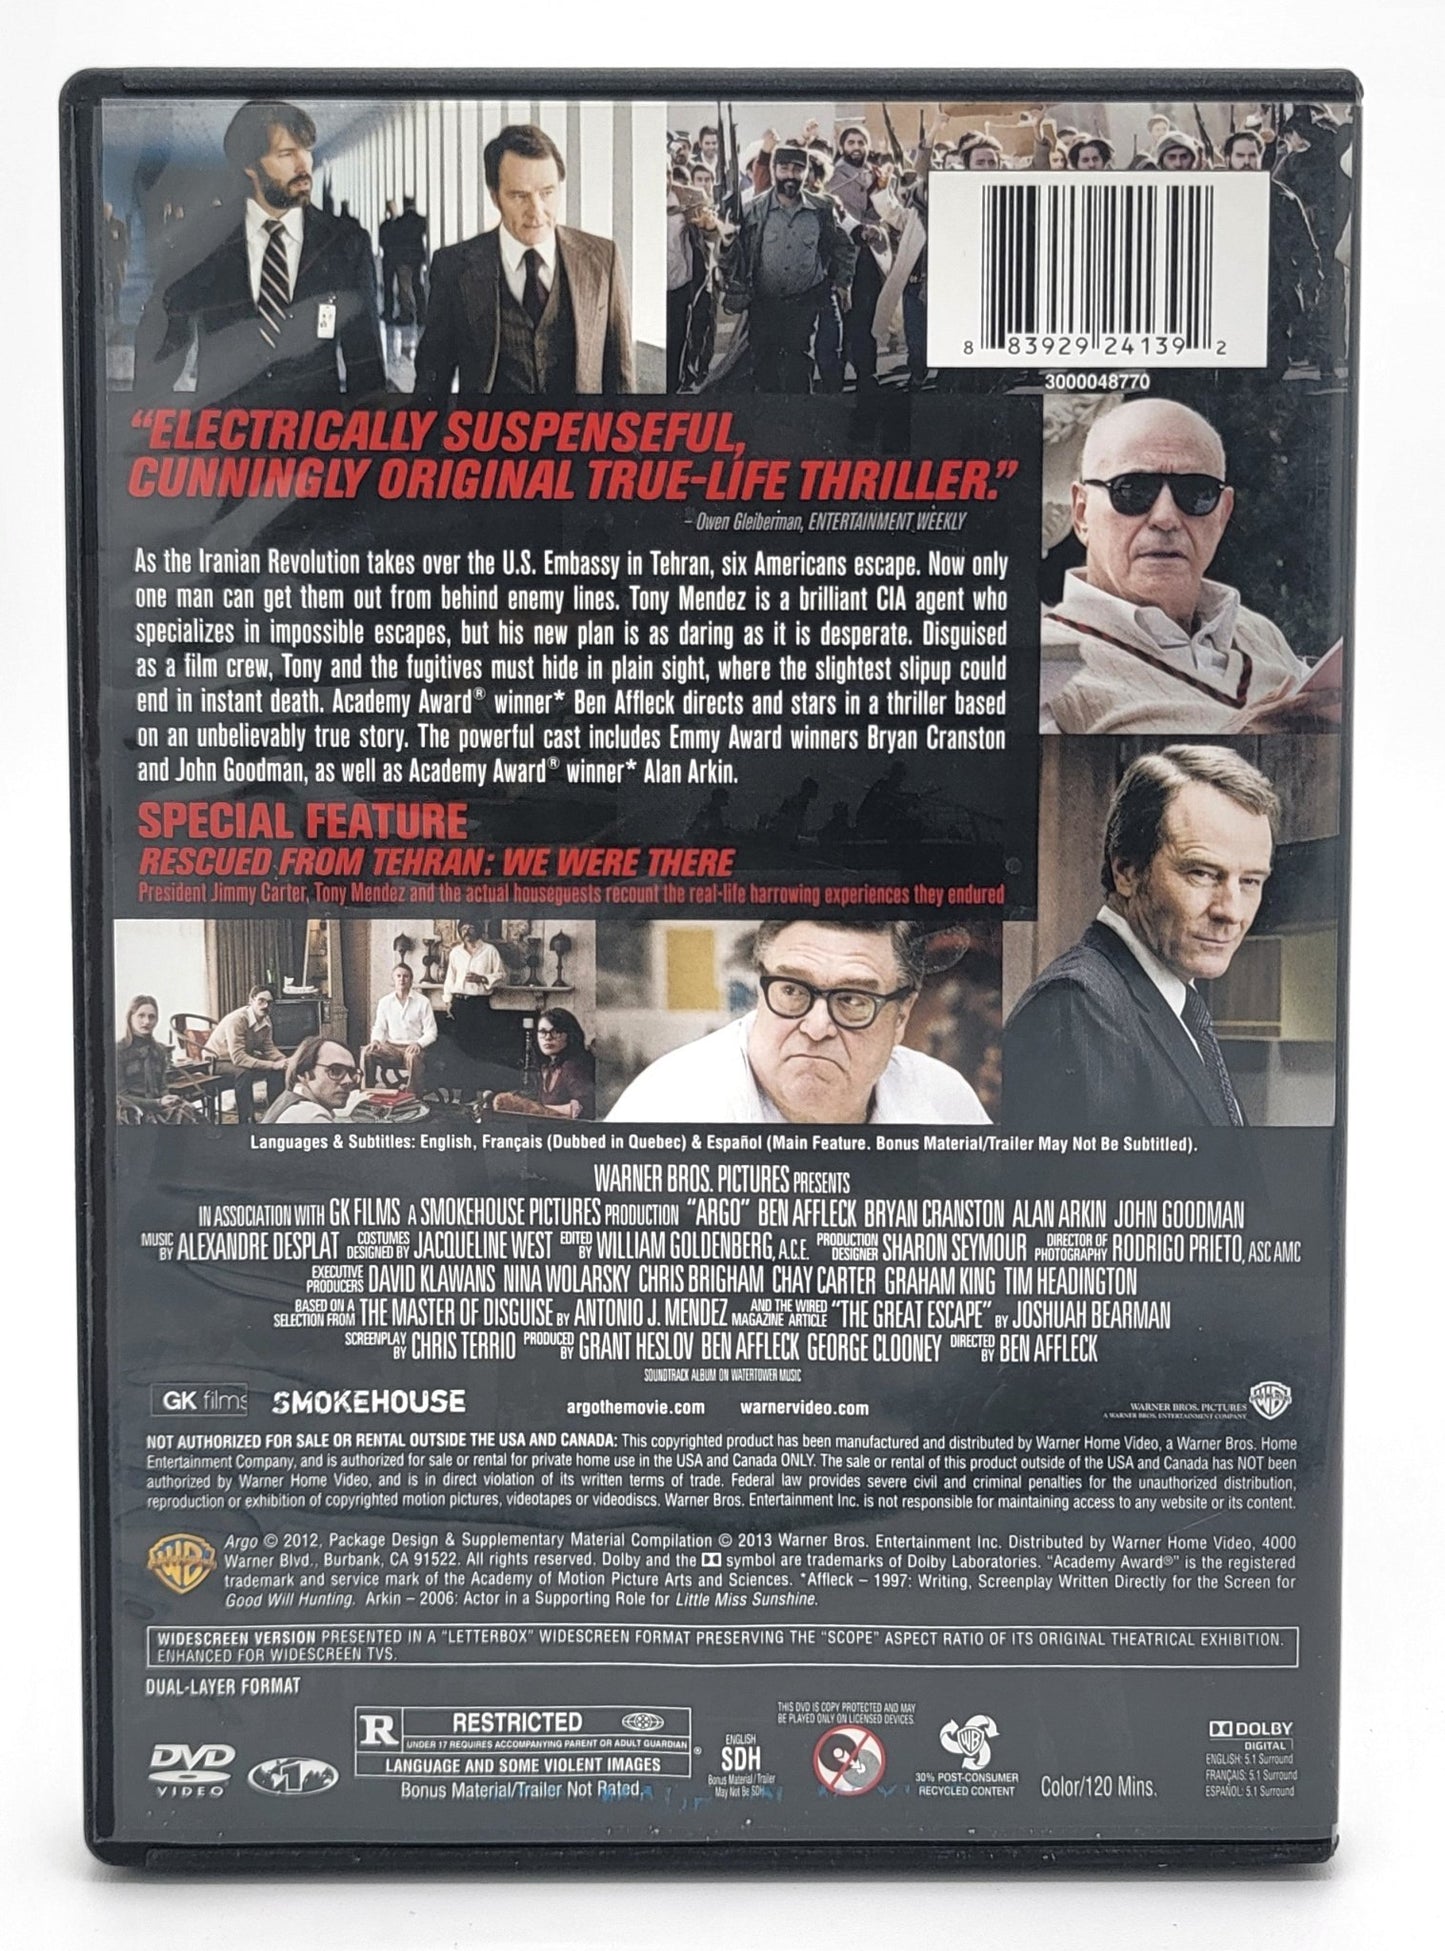 Warner Brothers - Argo | DVD | Based on The Declassified True Story | Widescreen - DVD - Steady Bunny Shop